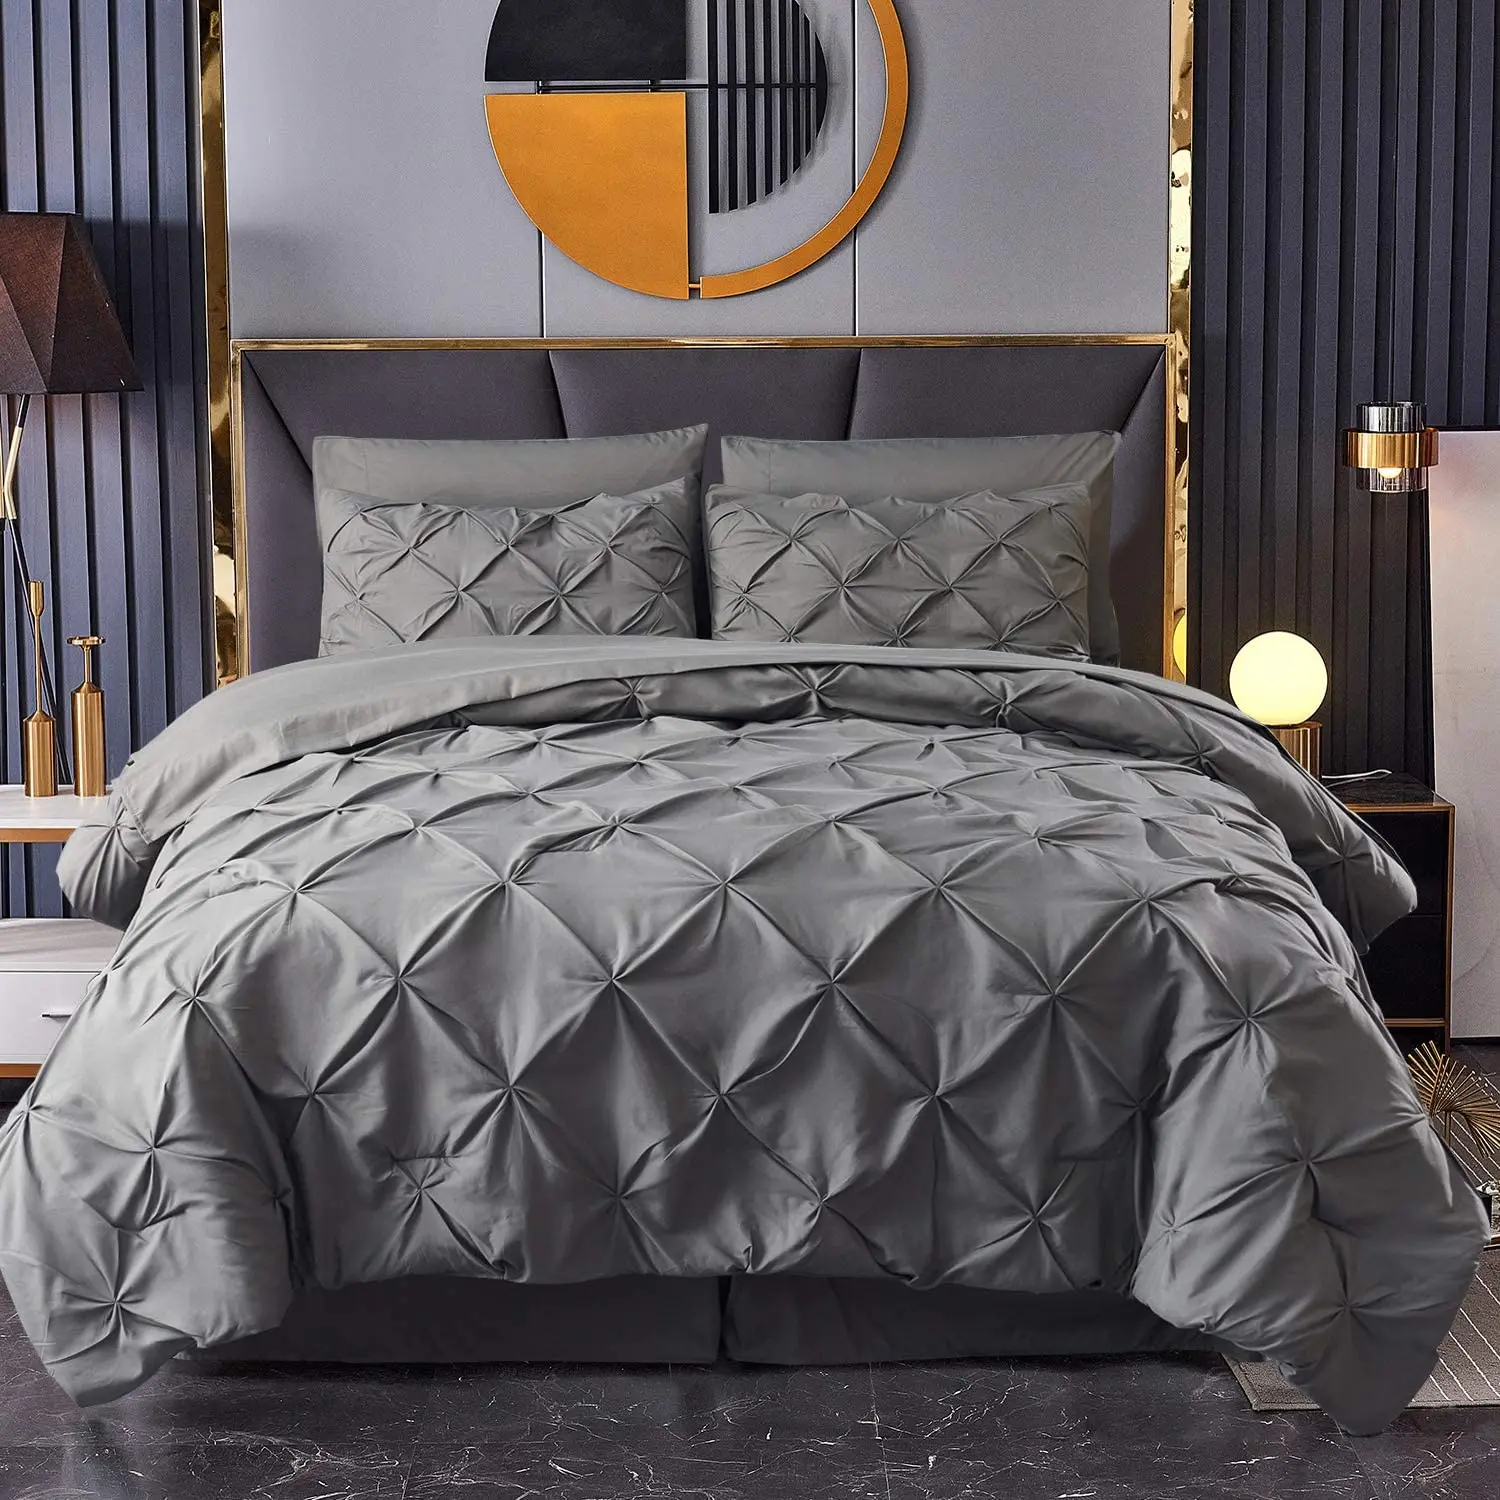 Luxury Pintuck Pleated Duvet Cover Bedding Set Grey Silver White Bed Linen 